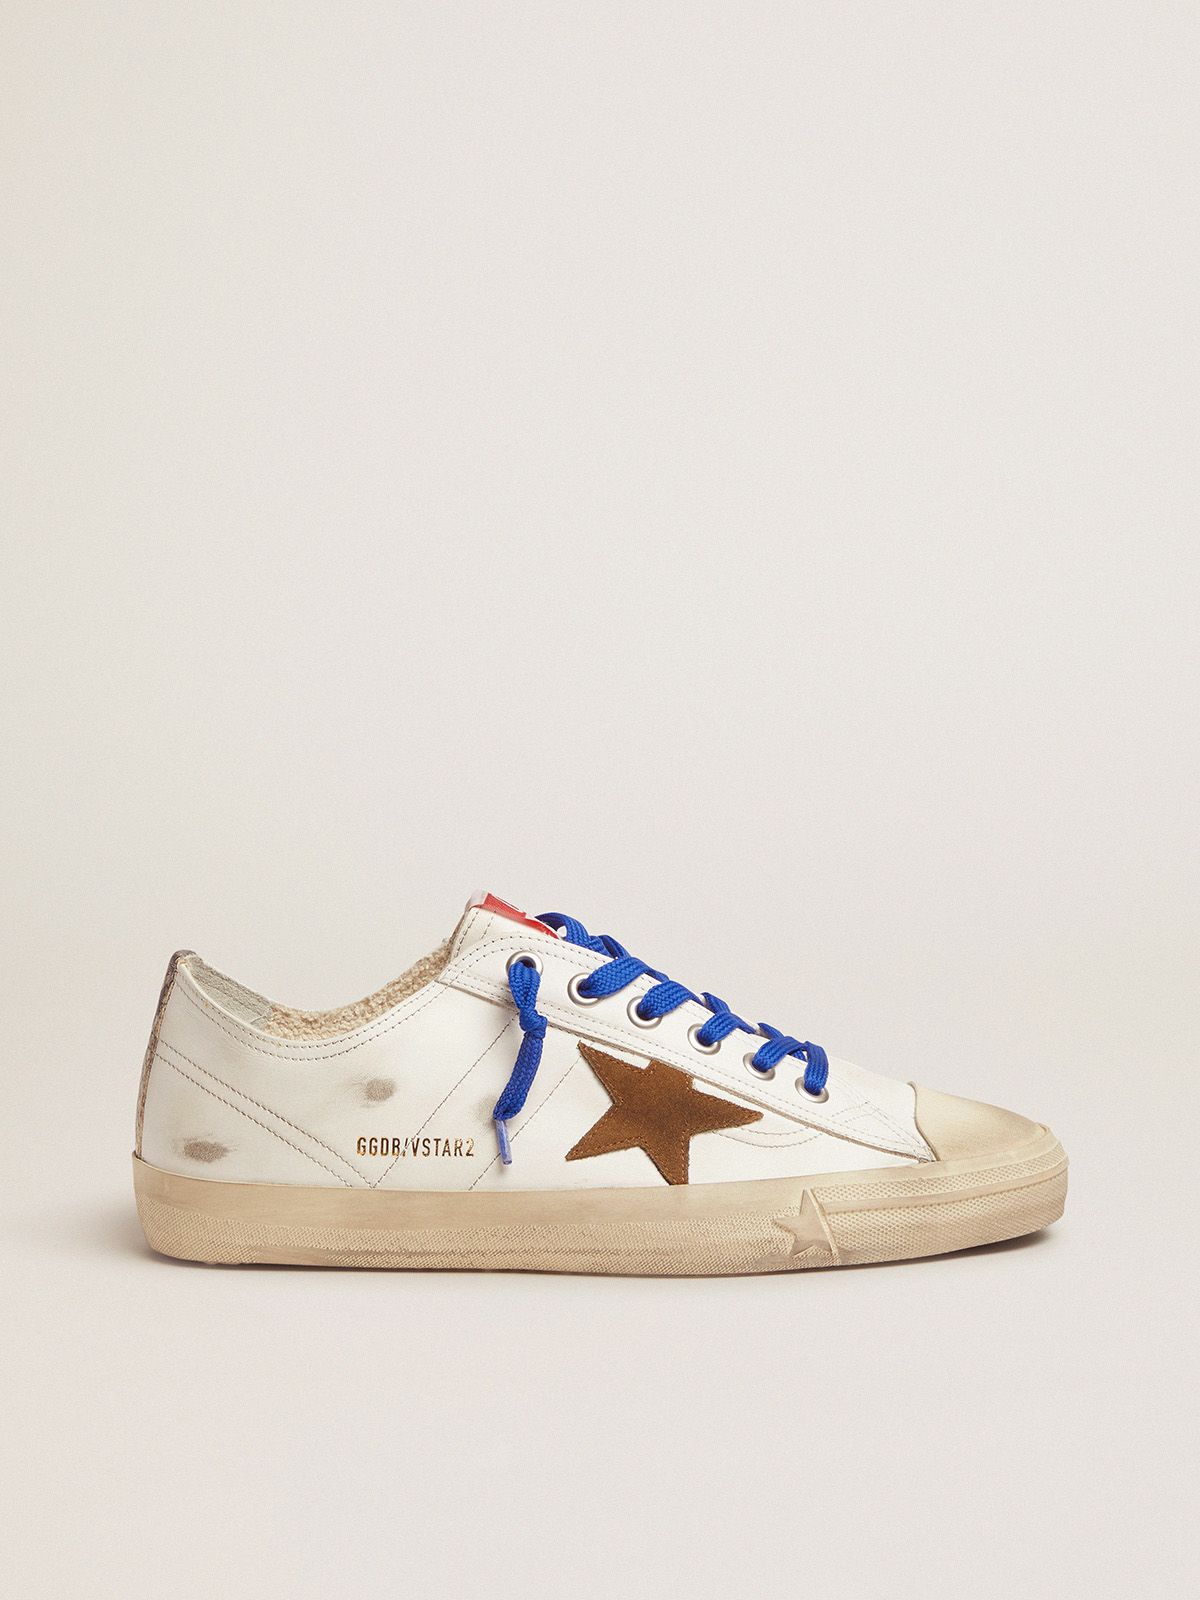 Golden Goose Saldo Uomo V-Star sneakers LTD with snake-print vertical strip and blue laces